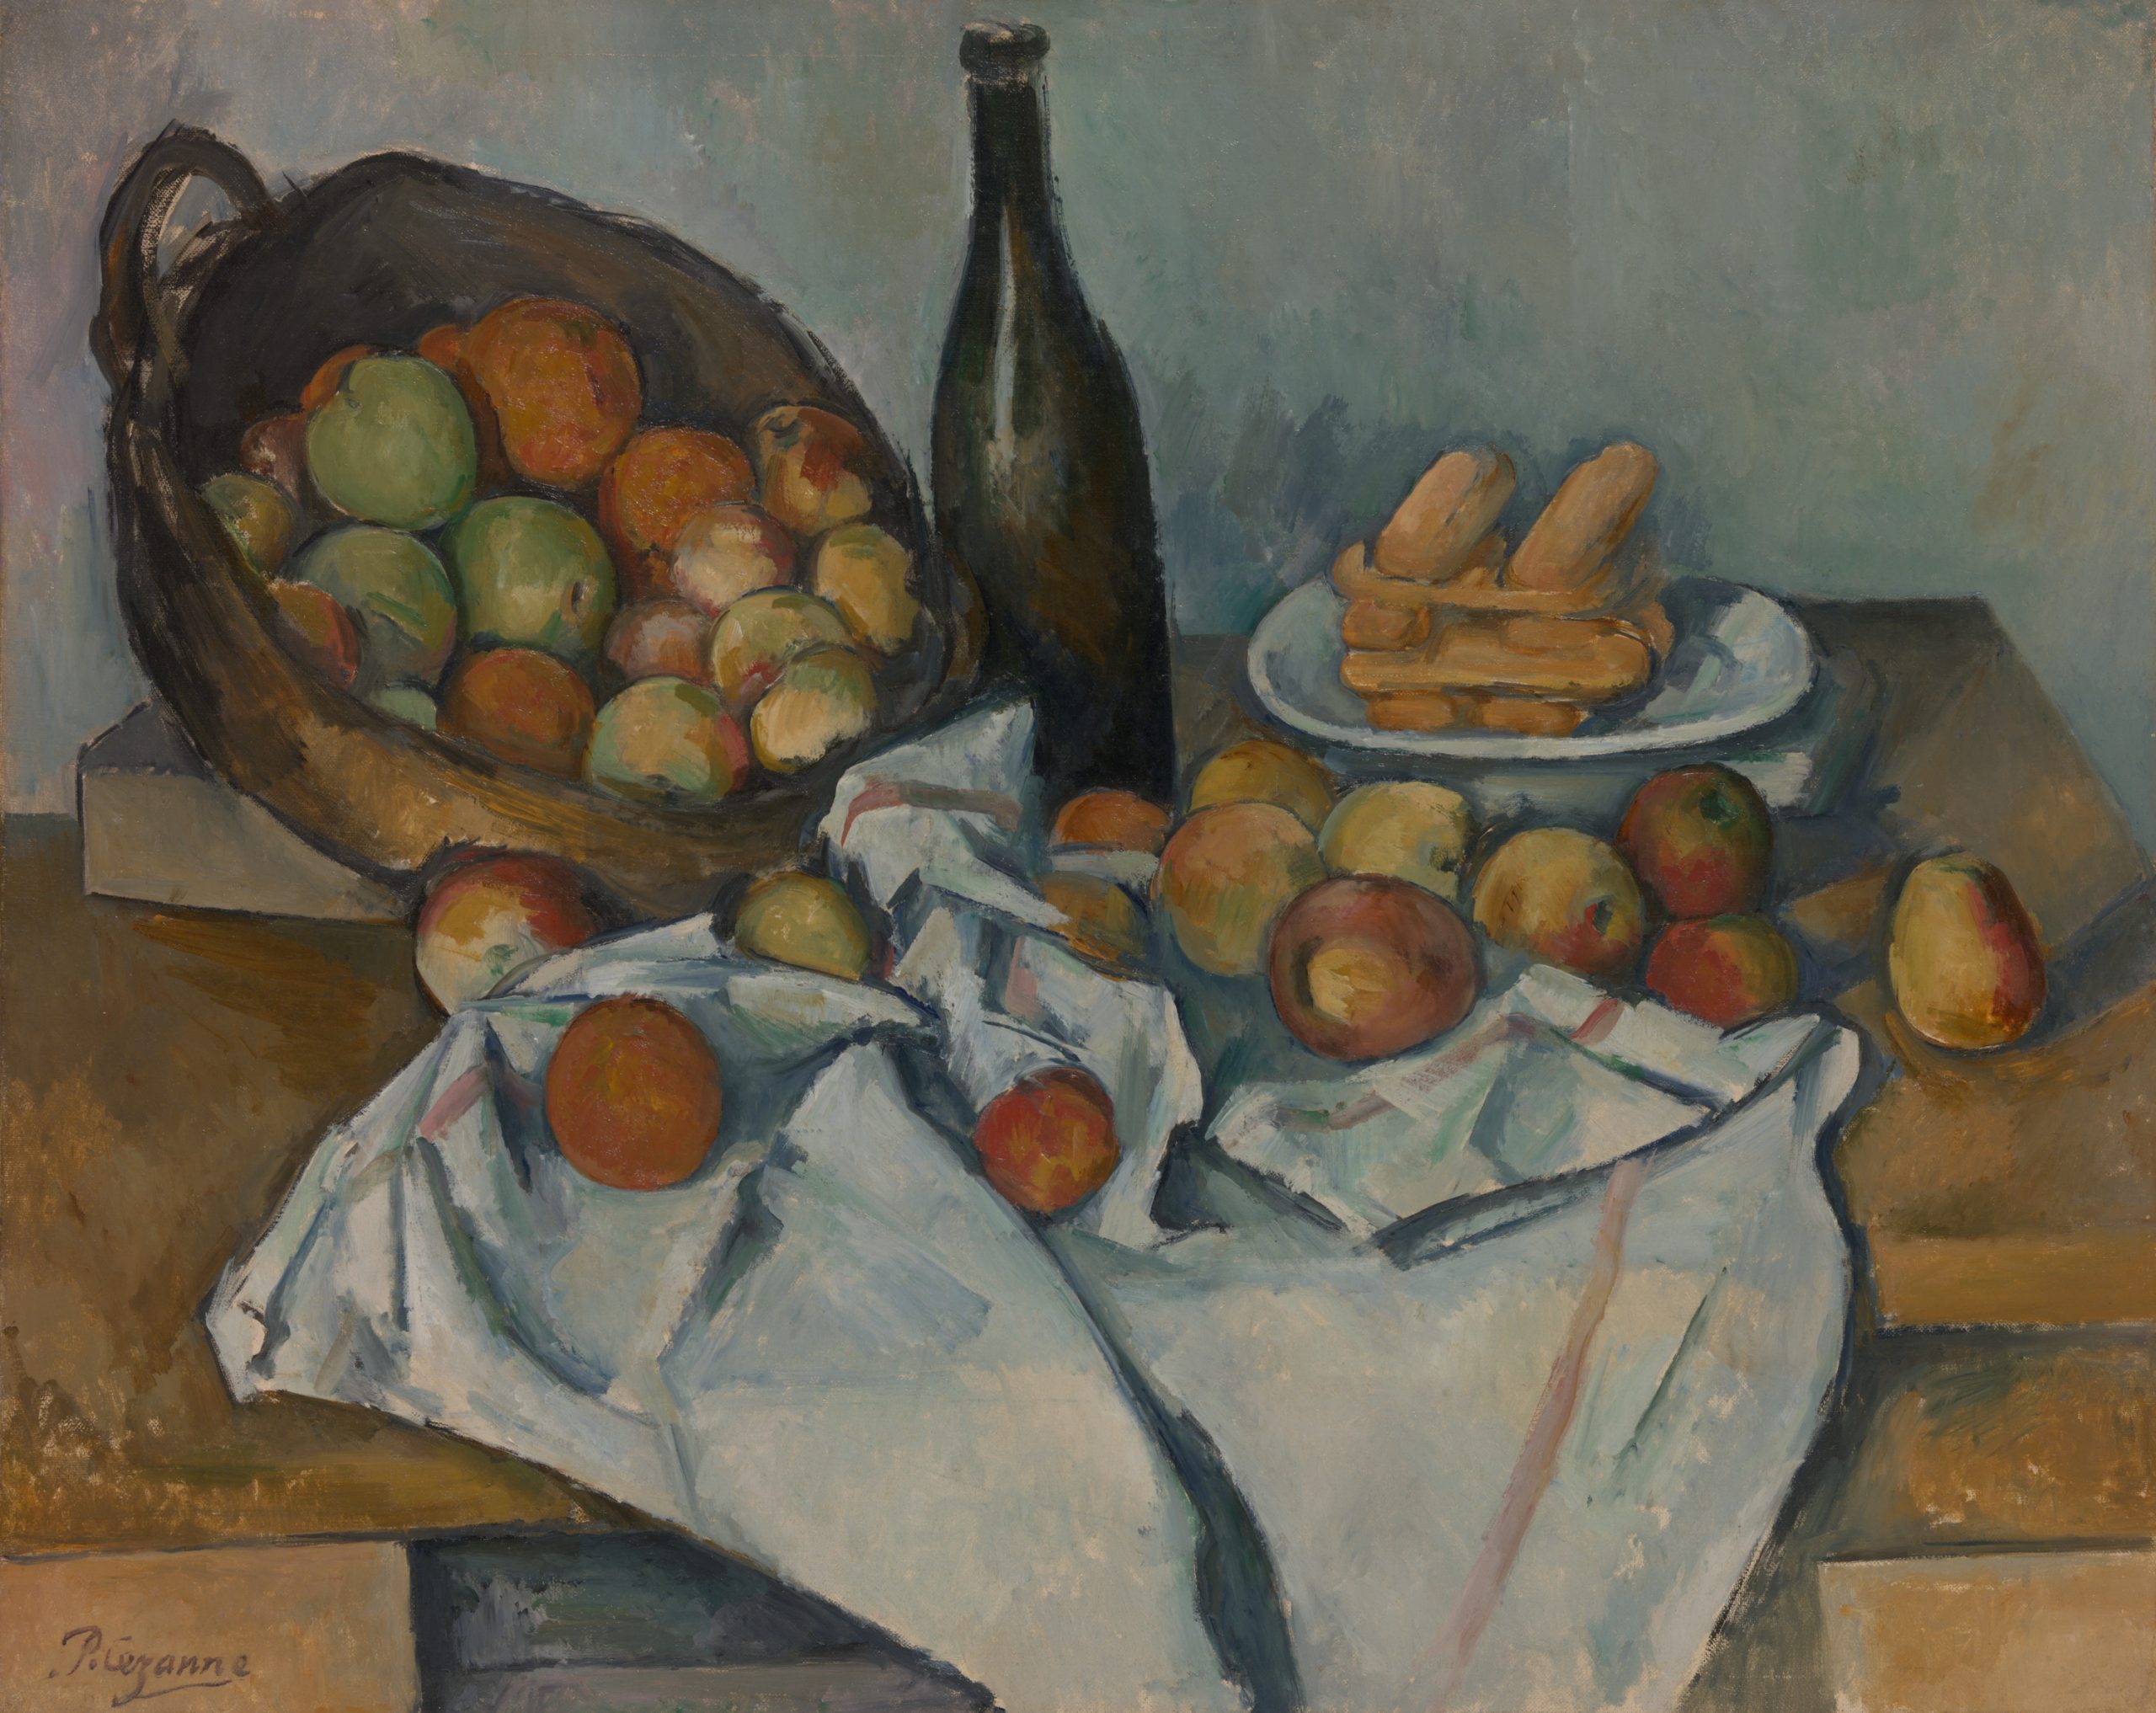 Cezanne The Basket of Apples, c. 1893 The Art Institute Chicago